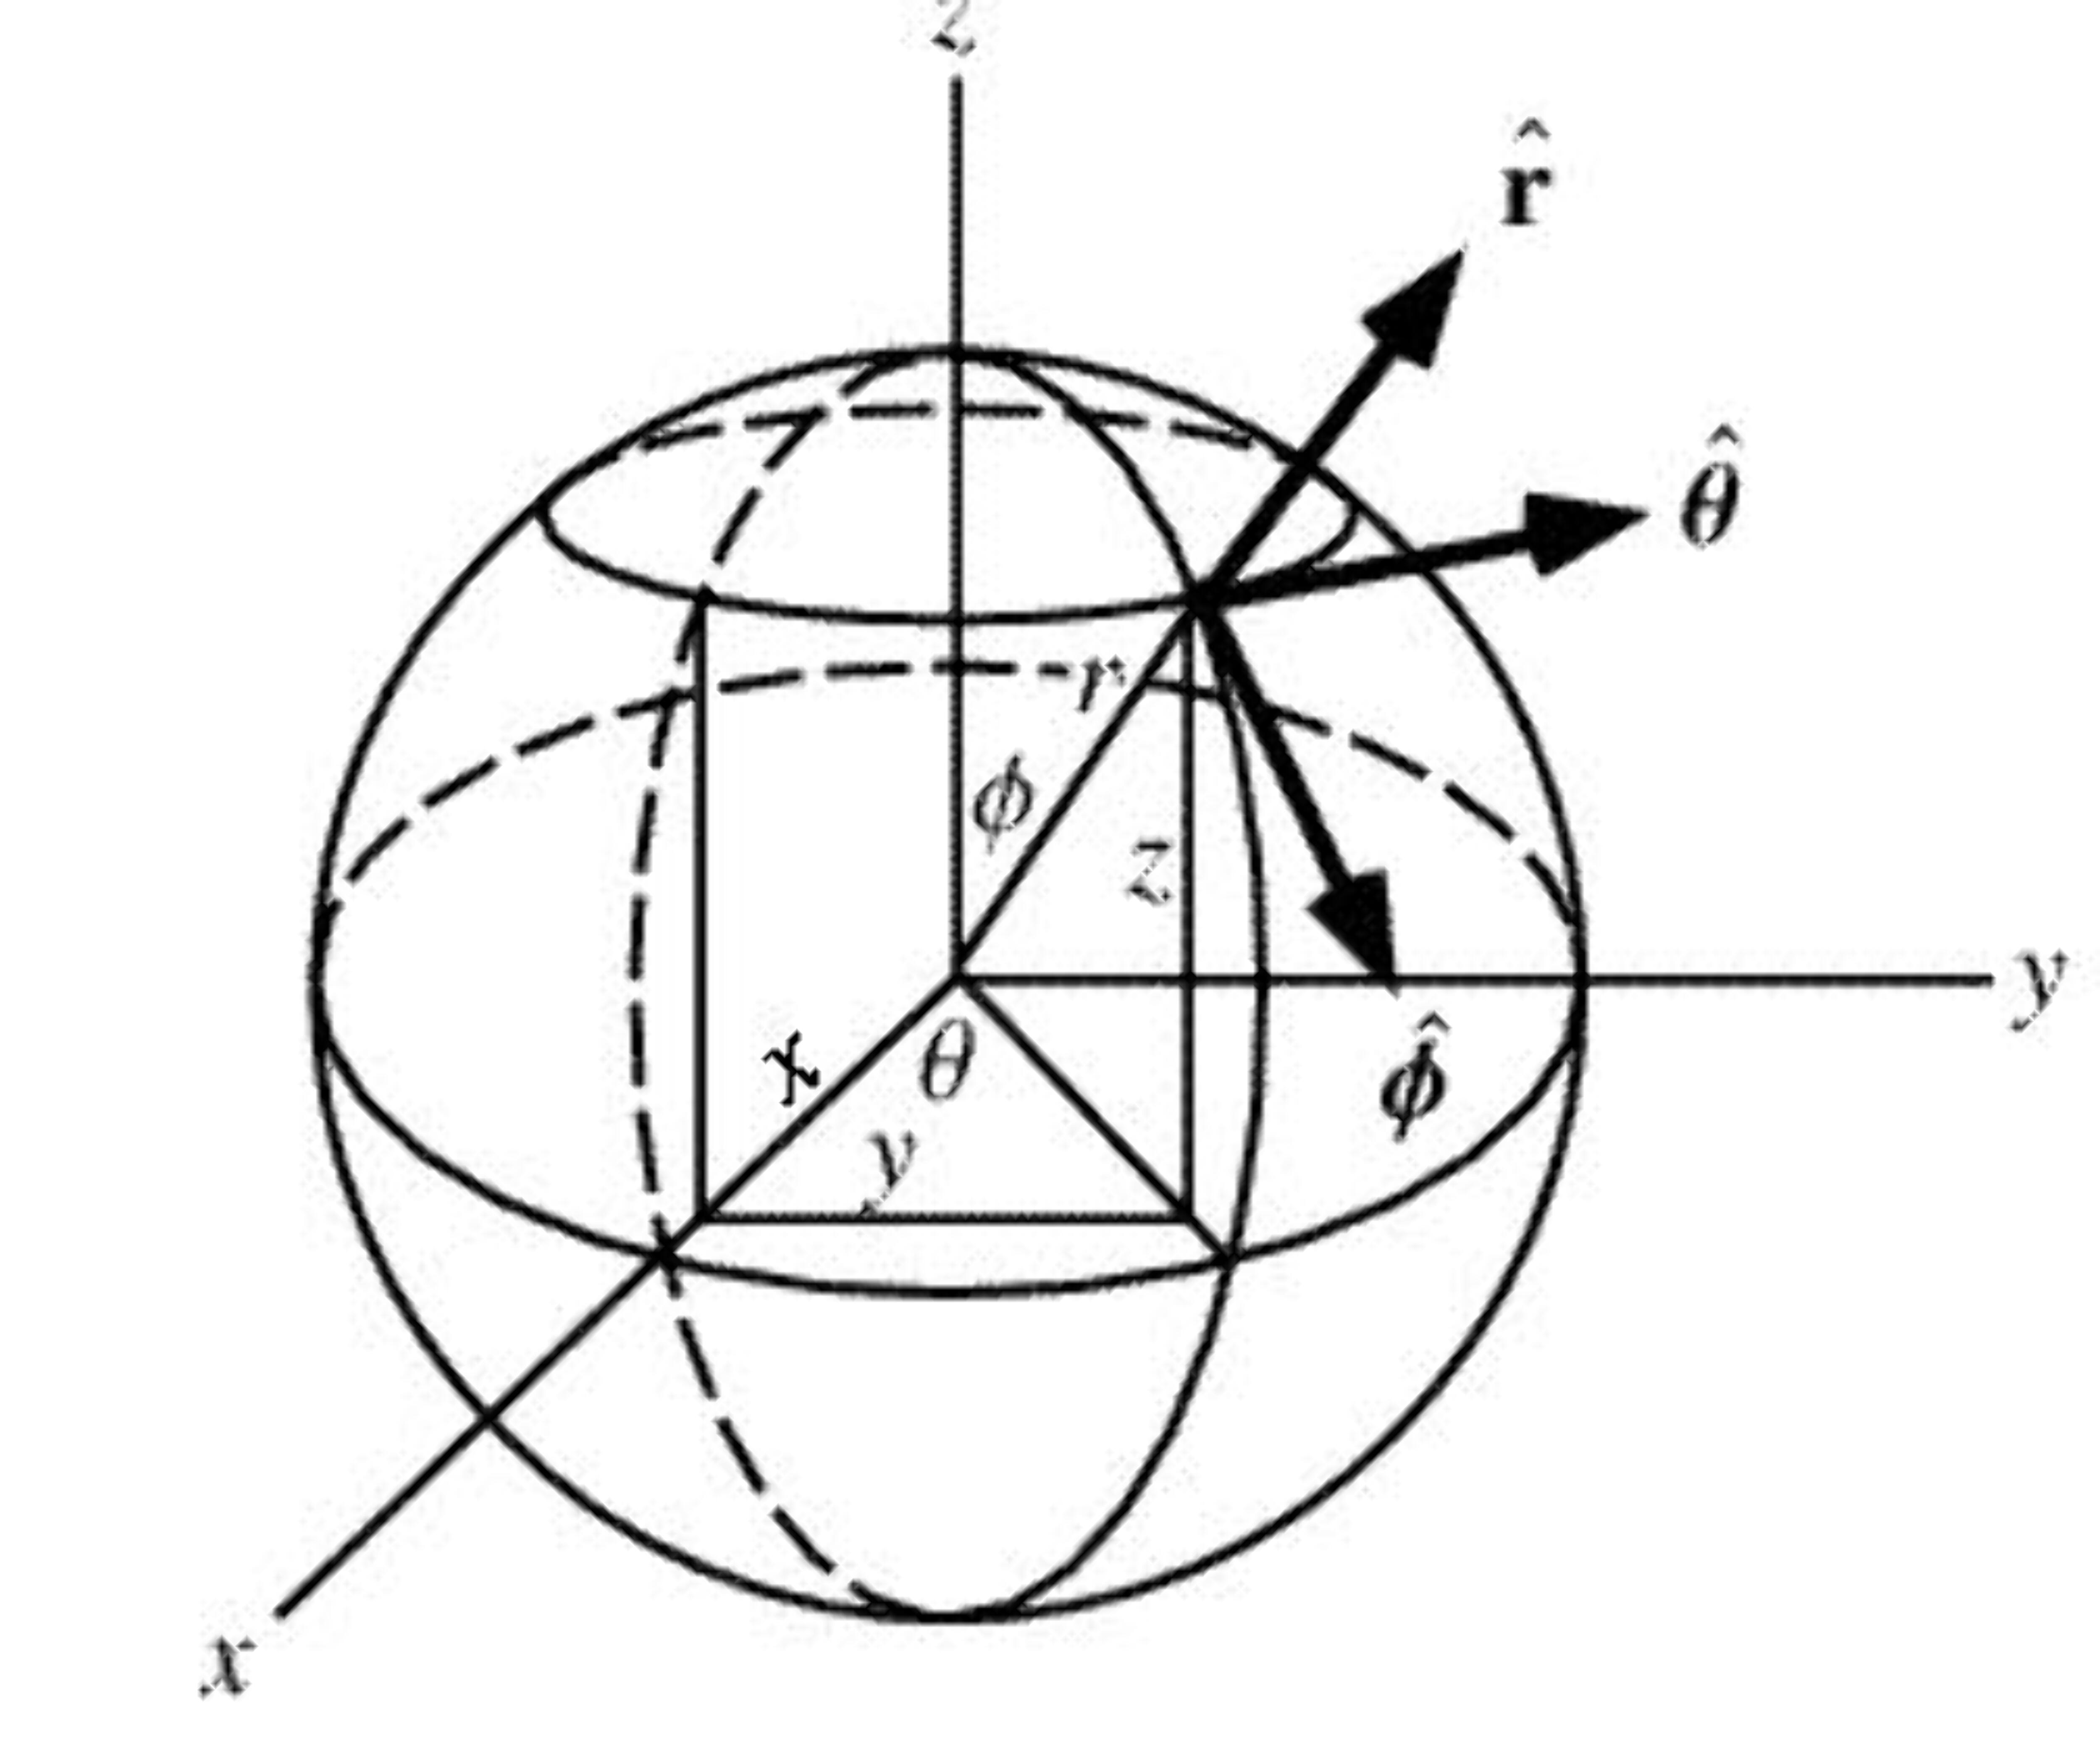 converting-from-cartesian-to-spherical